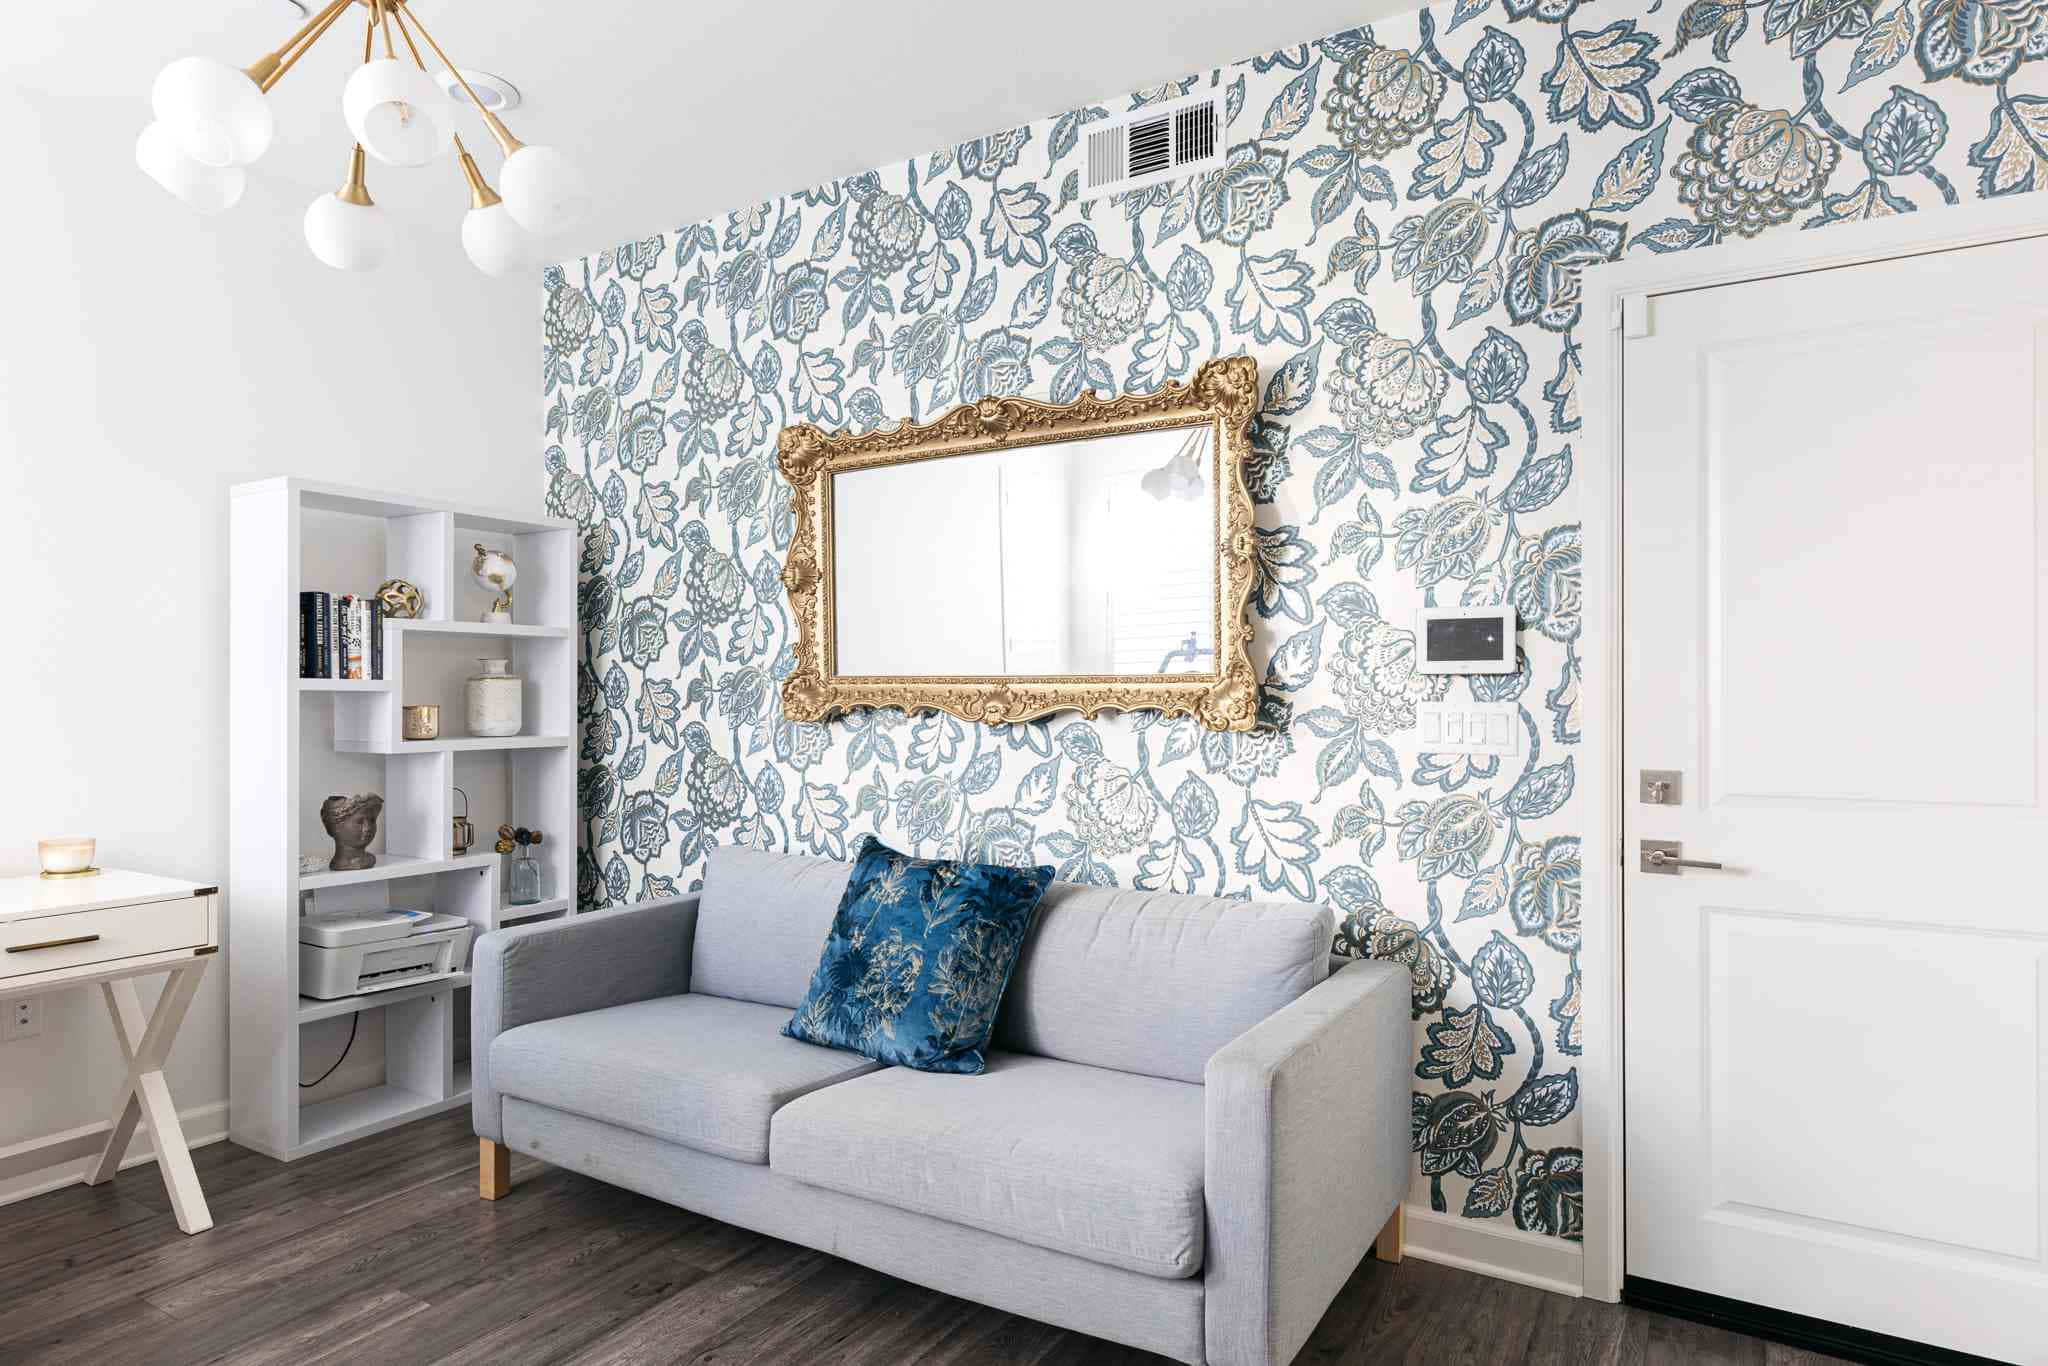 Create the perfect atmosphere of comfort and style for your home decor Wallpaper